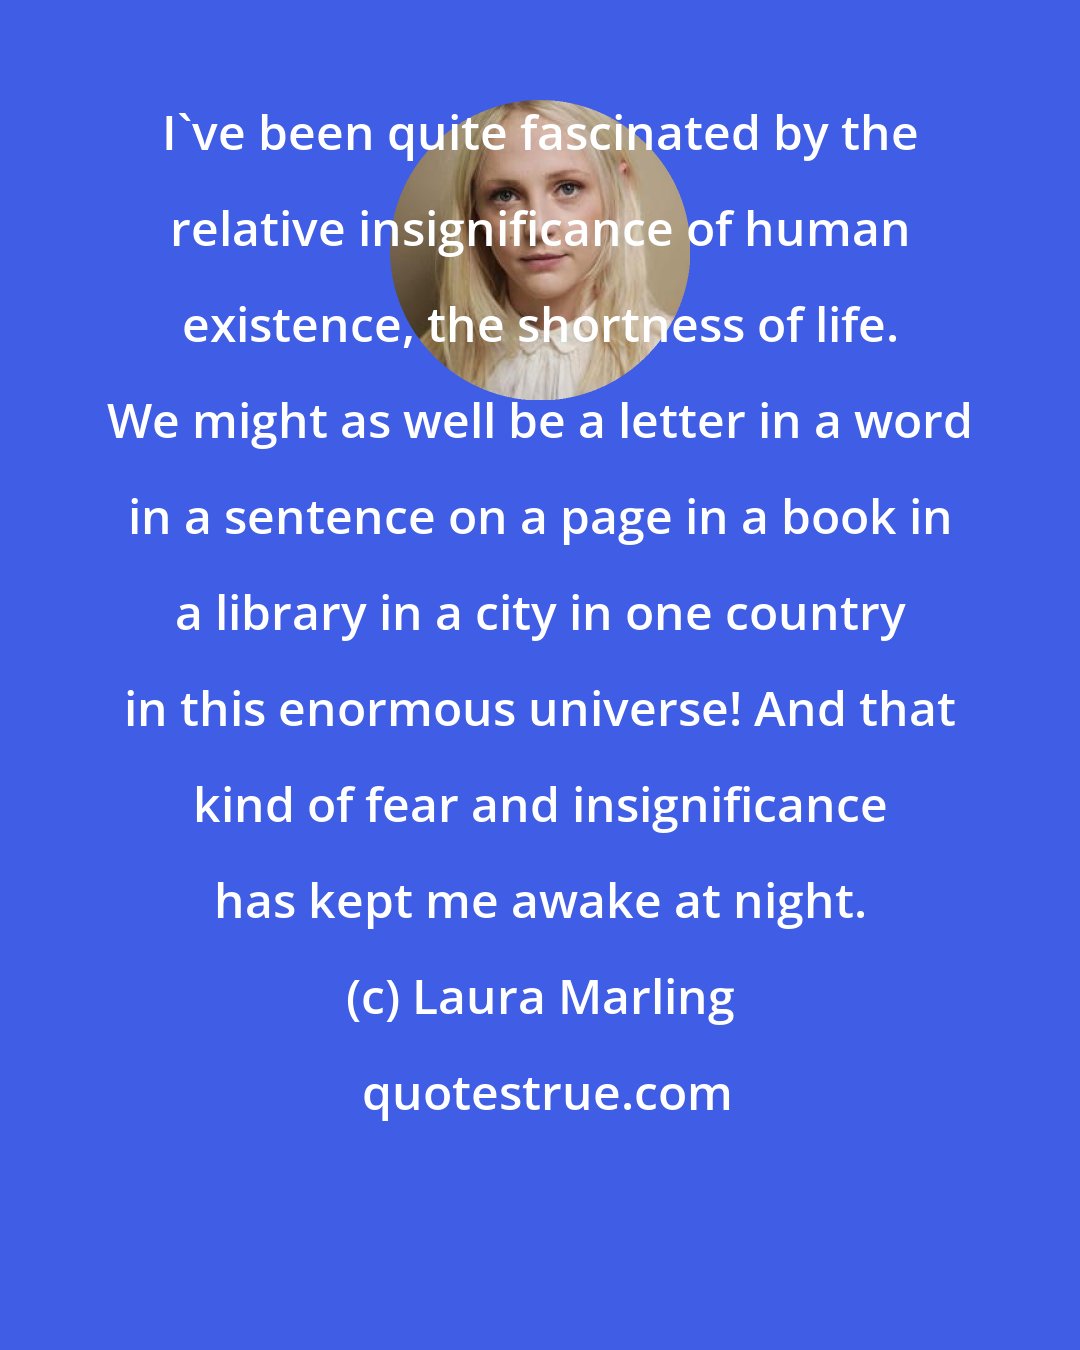 Laura Marling: I've been quite fascinated by the relative insignificance of human existence, the shortness of life. We might as well be a letter in a word in a sentence on a page in a book in a library in a city in one country in this enormous universe! And that kind of fear and insignificance has kept me awake at night.